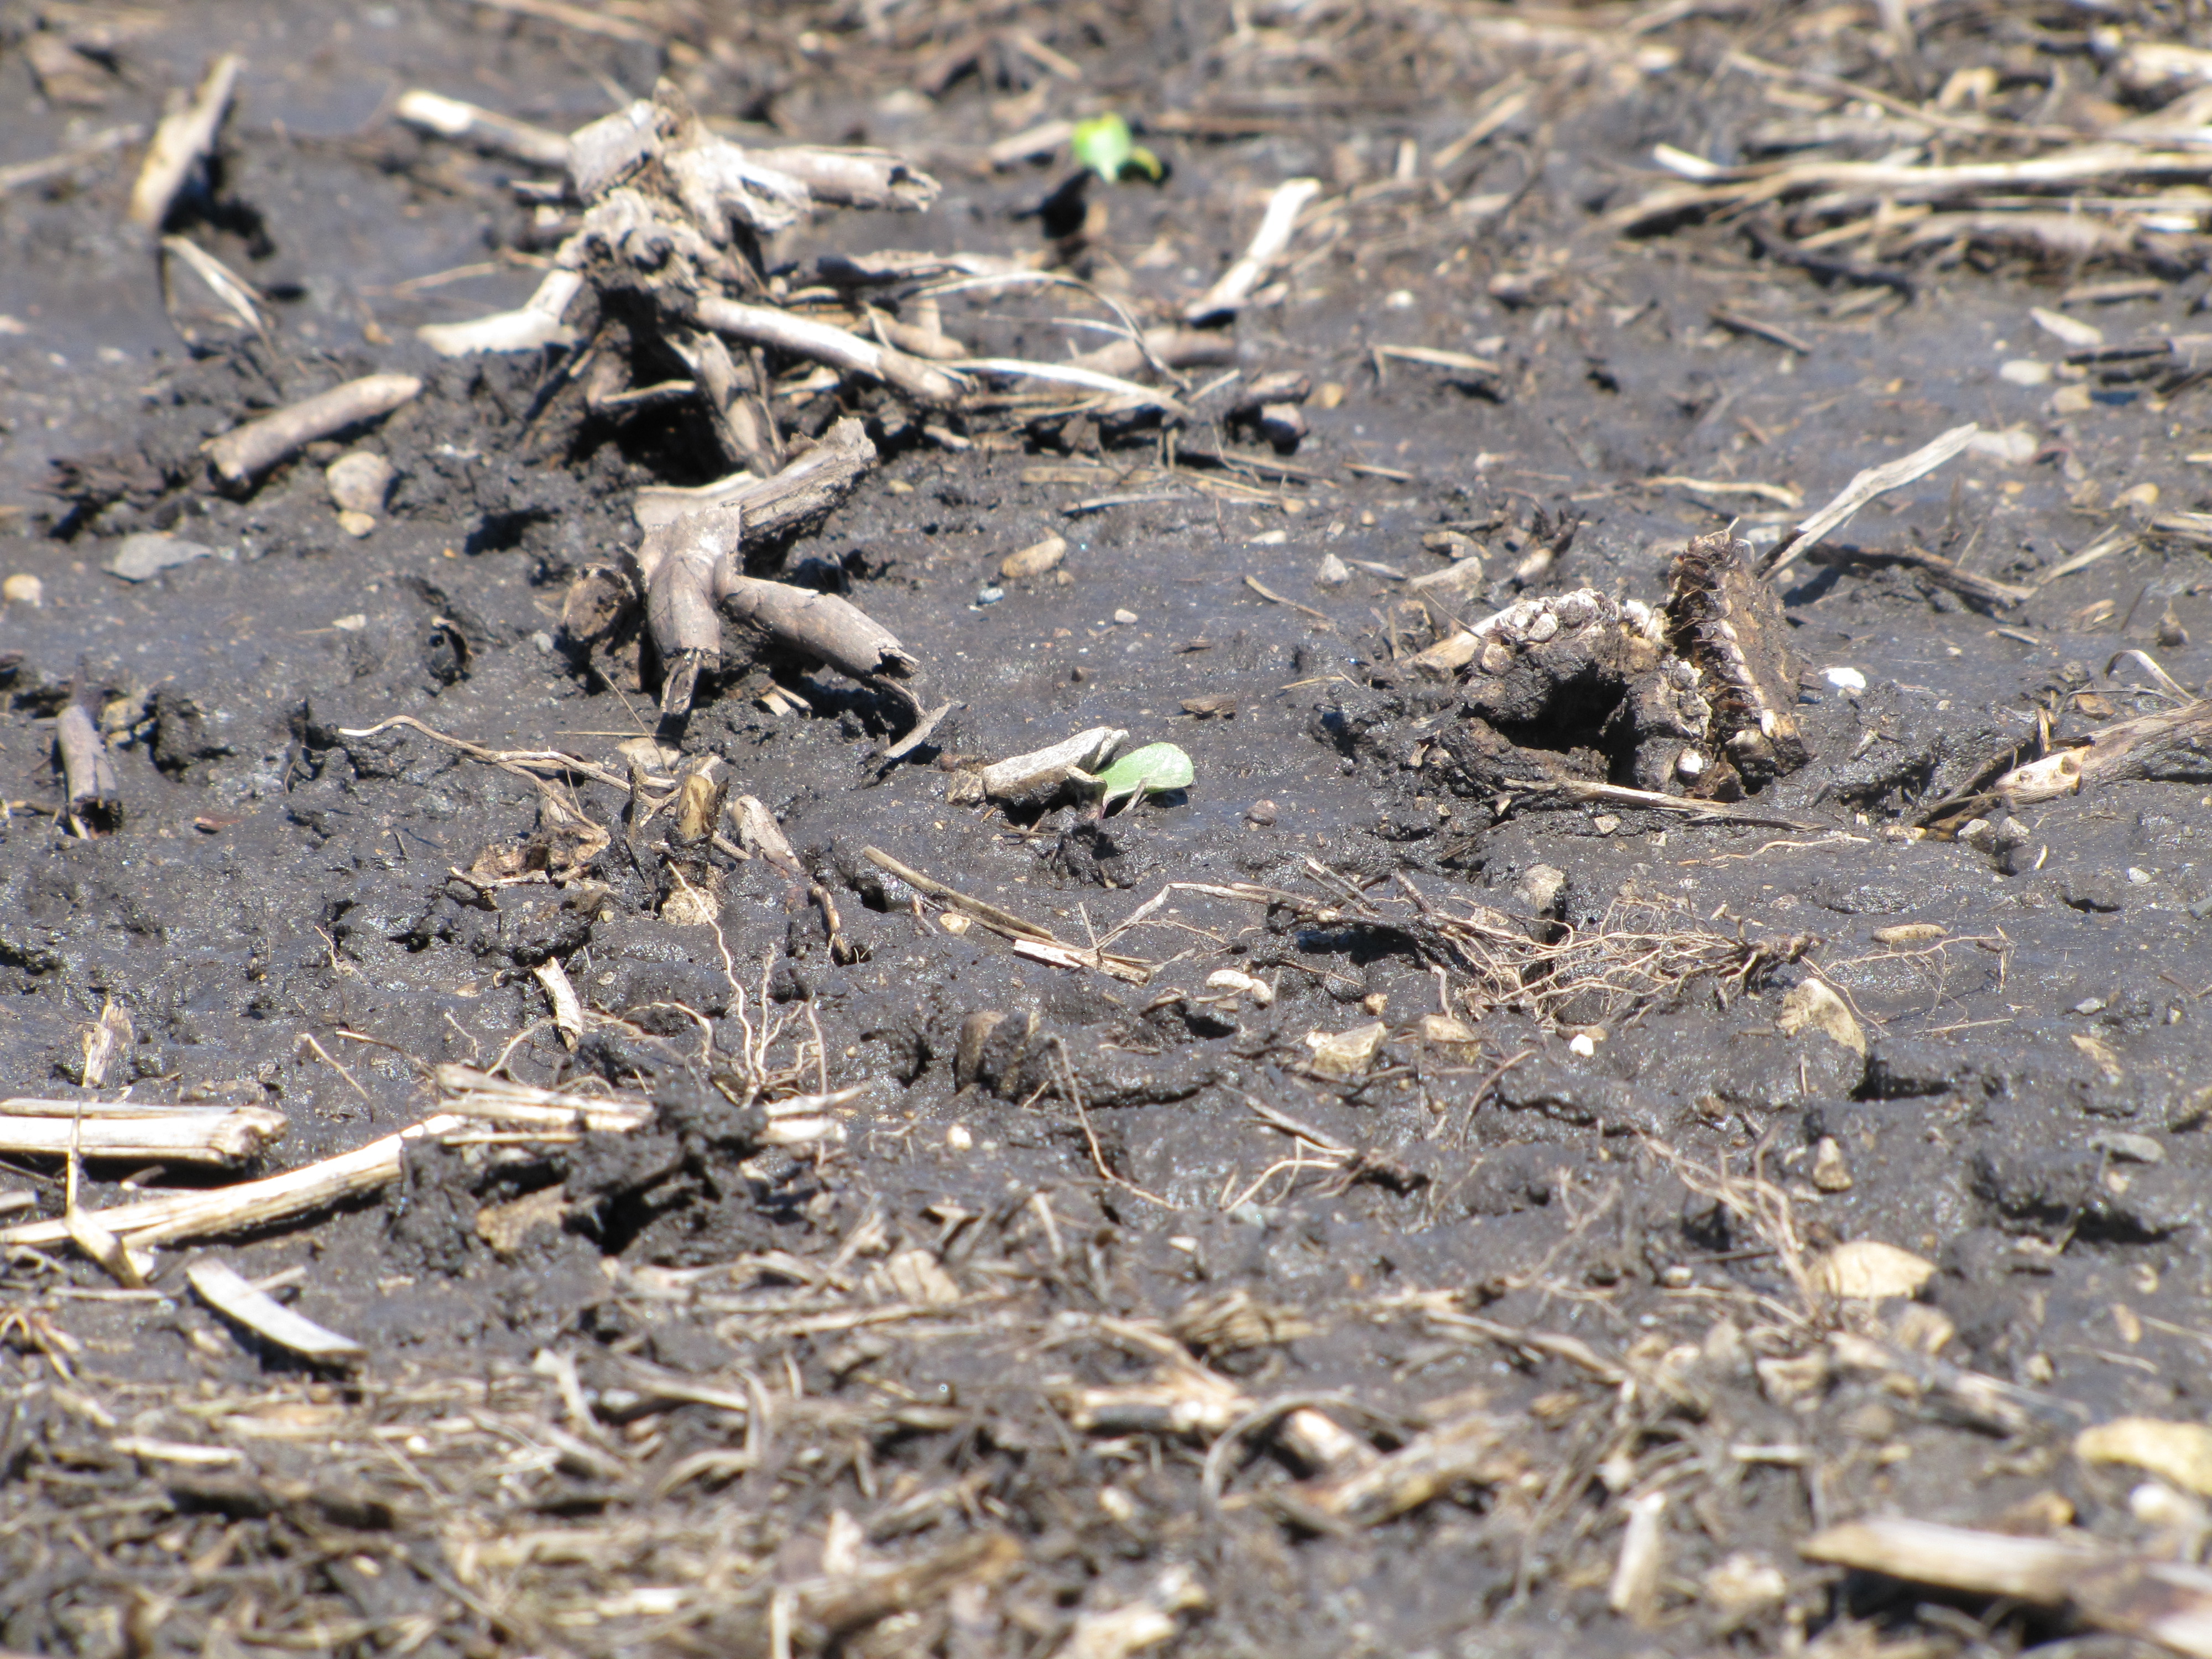 This agronomic image shows a wet field